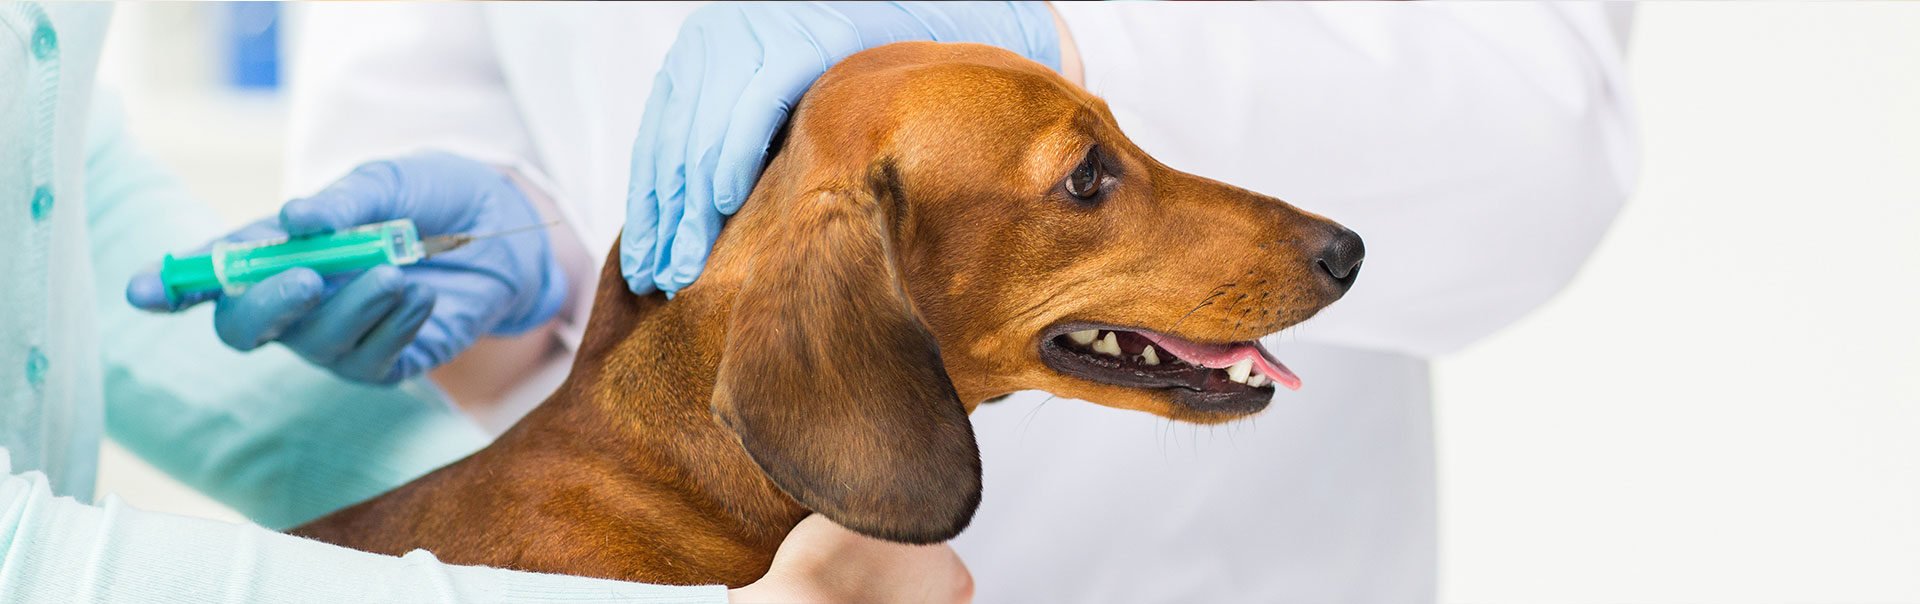 Veterinarian giving an injection to a dog